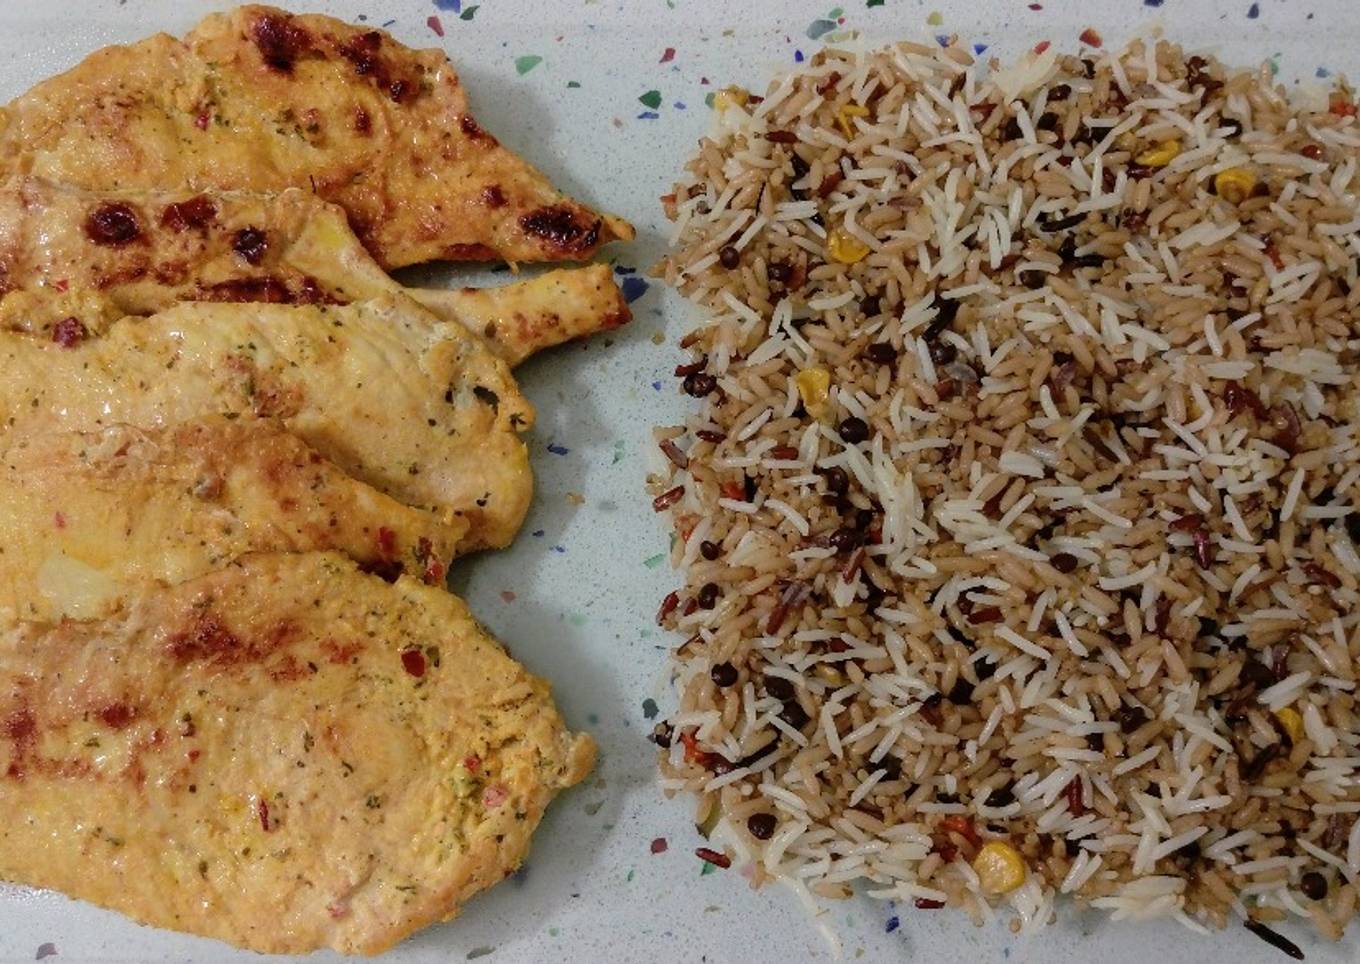 Marinated chicken breast in three dishes, fried rice and vegetables